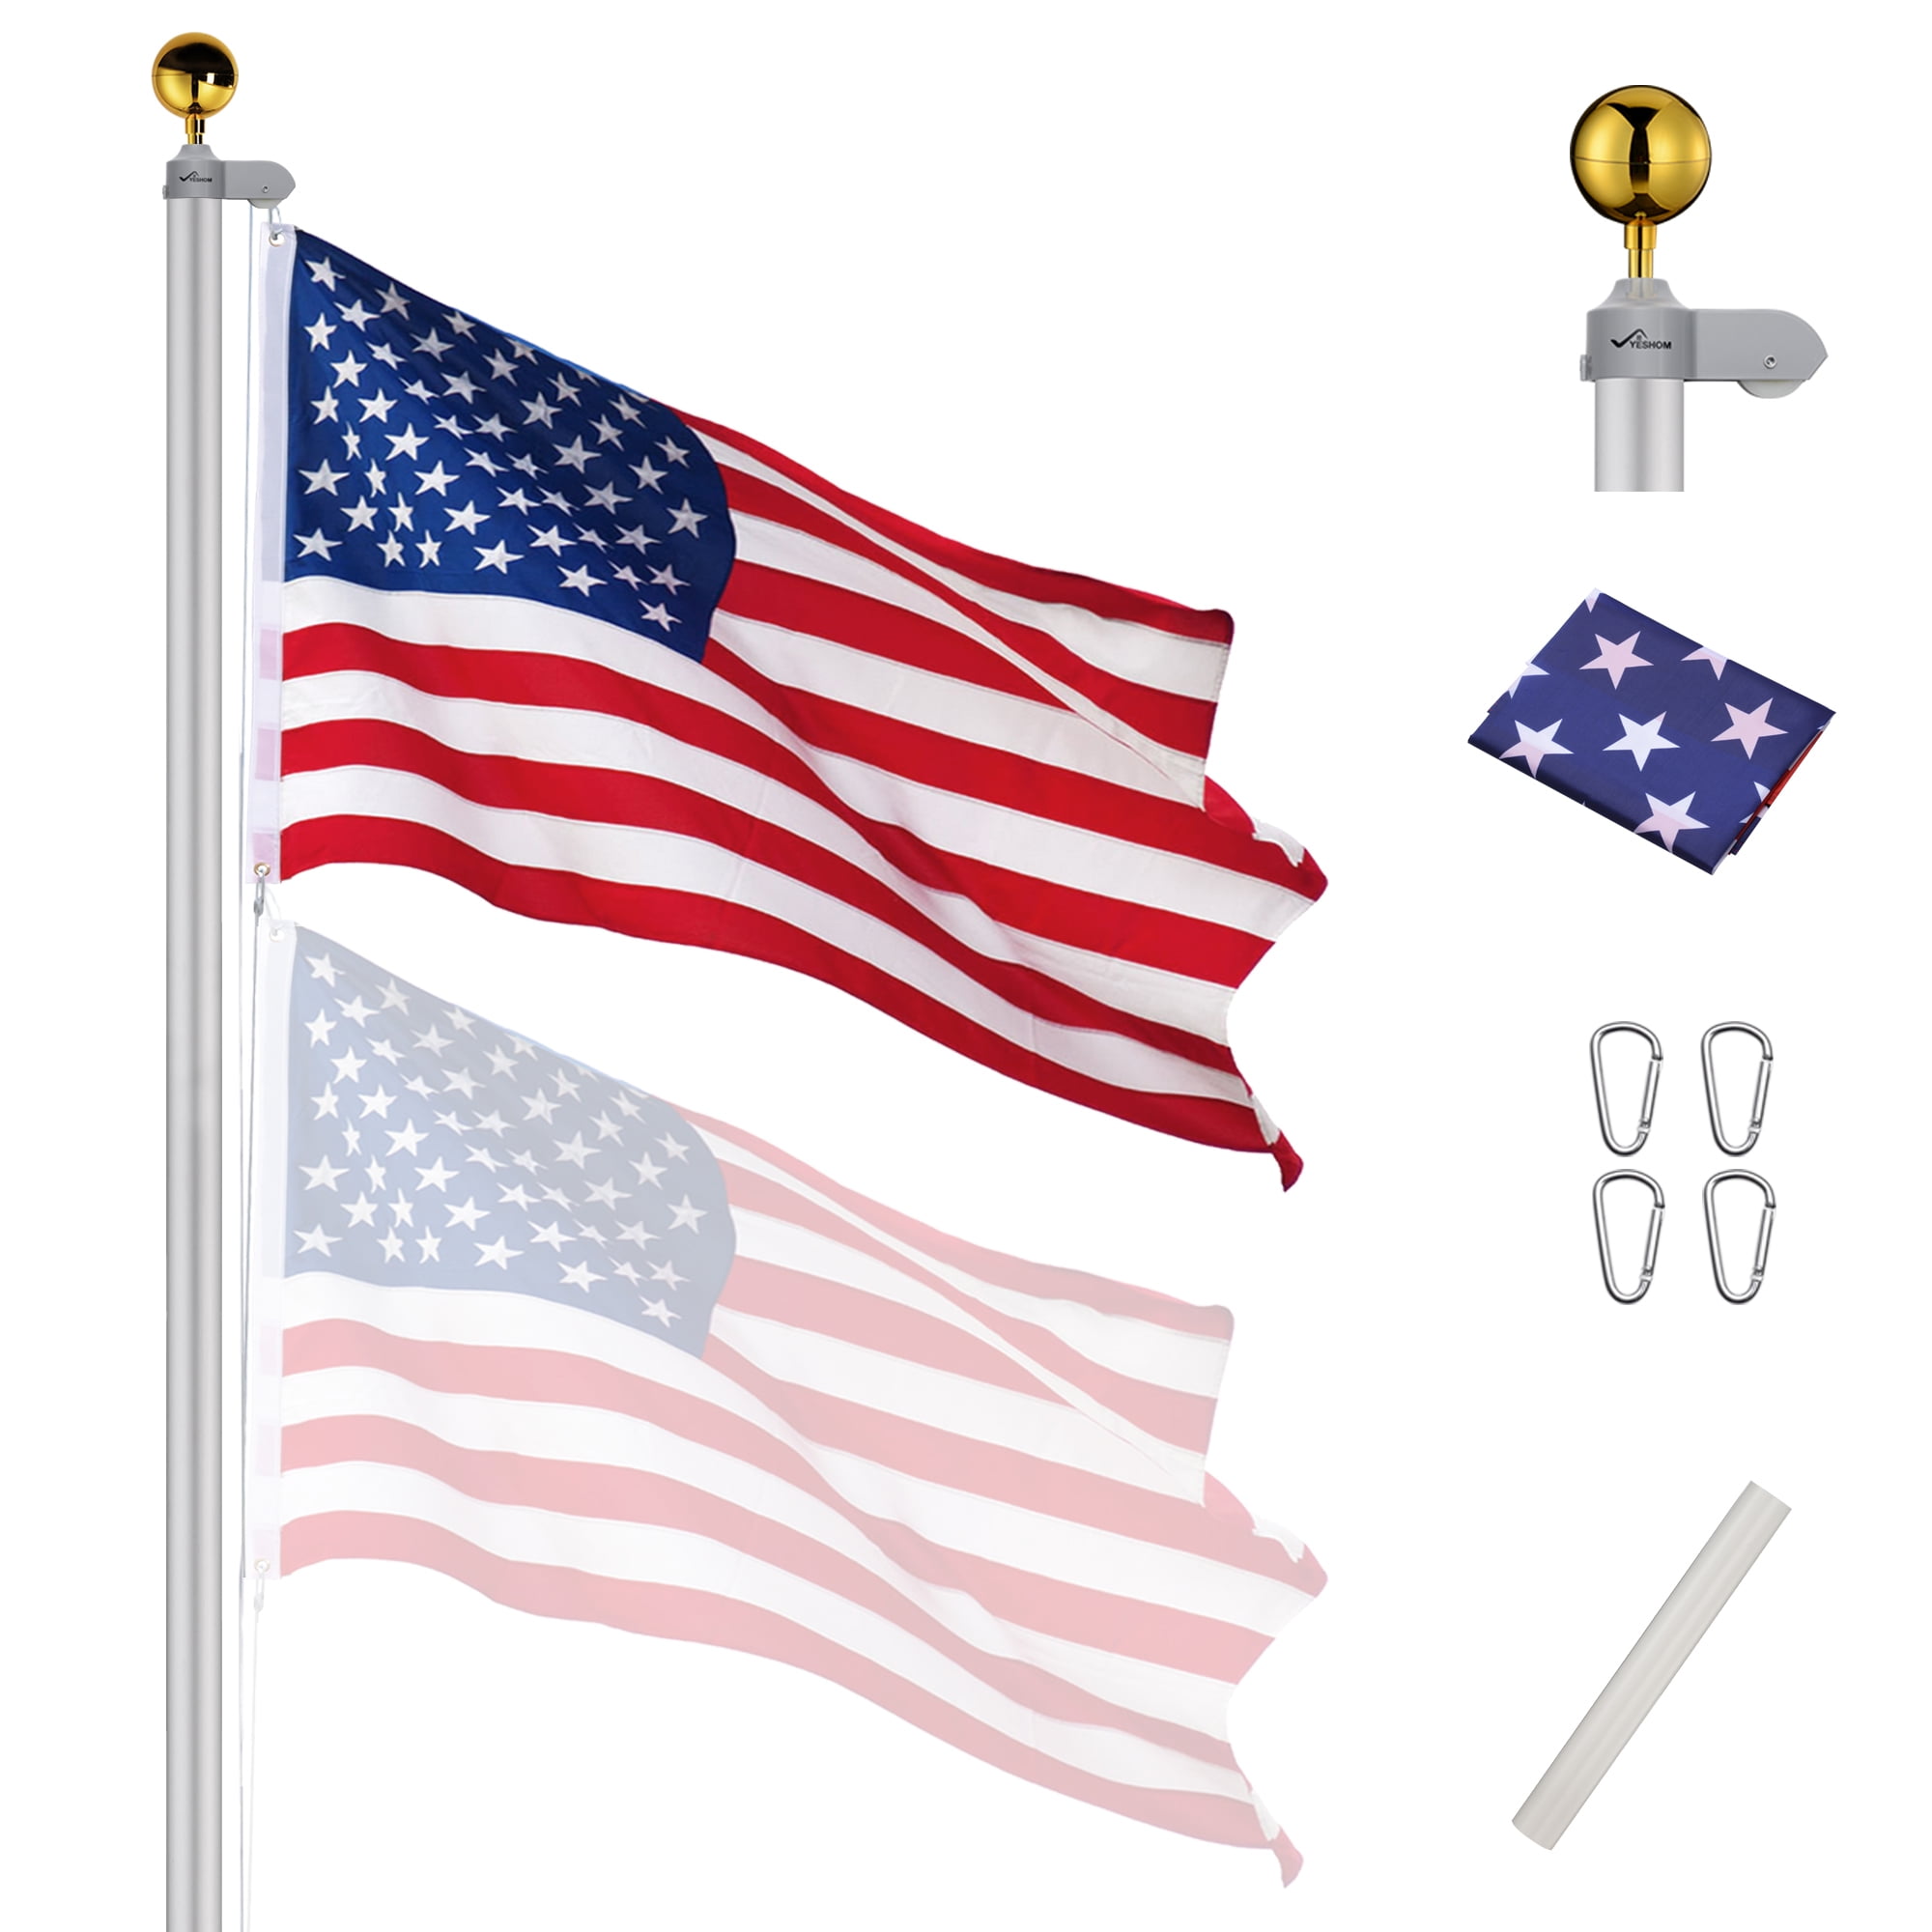 5 FT Flagpole Kit for American Flag Stainless Steel Professional Flag Pole for House Garden Yard Residential or Commercial Flag Pole with American Flag and Spinning Bracket MIYA Flag Pole 